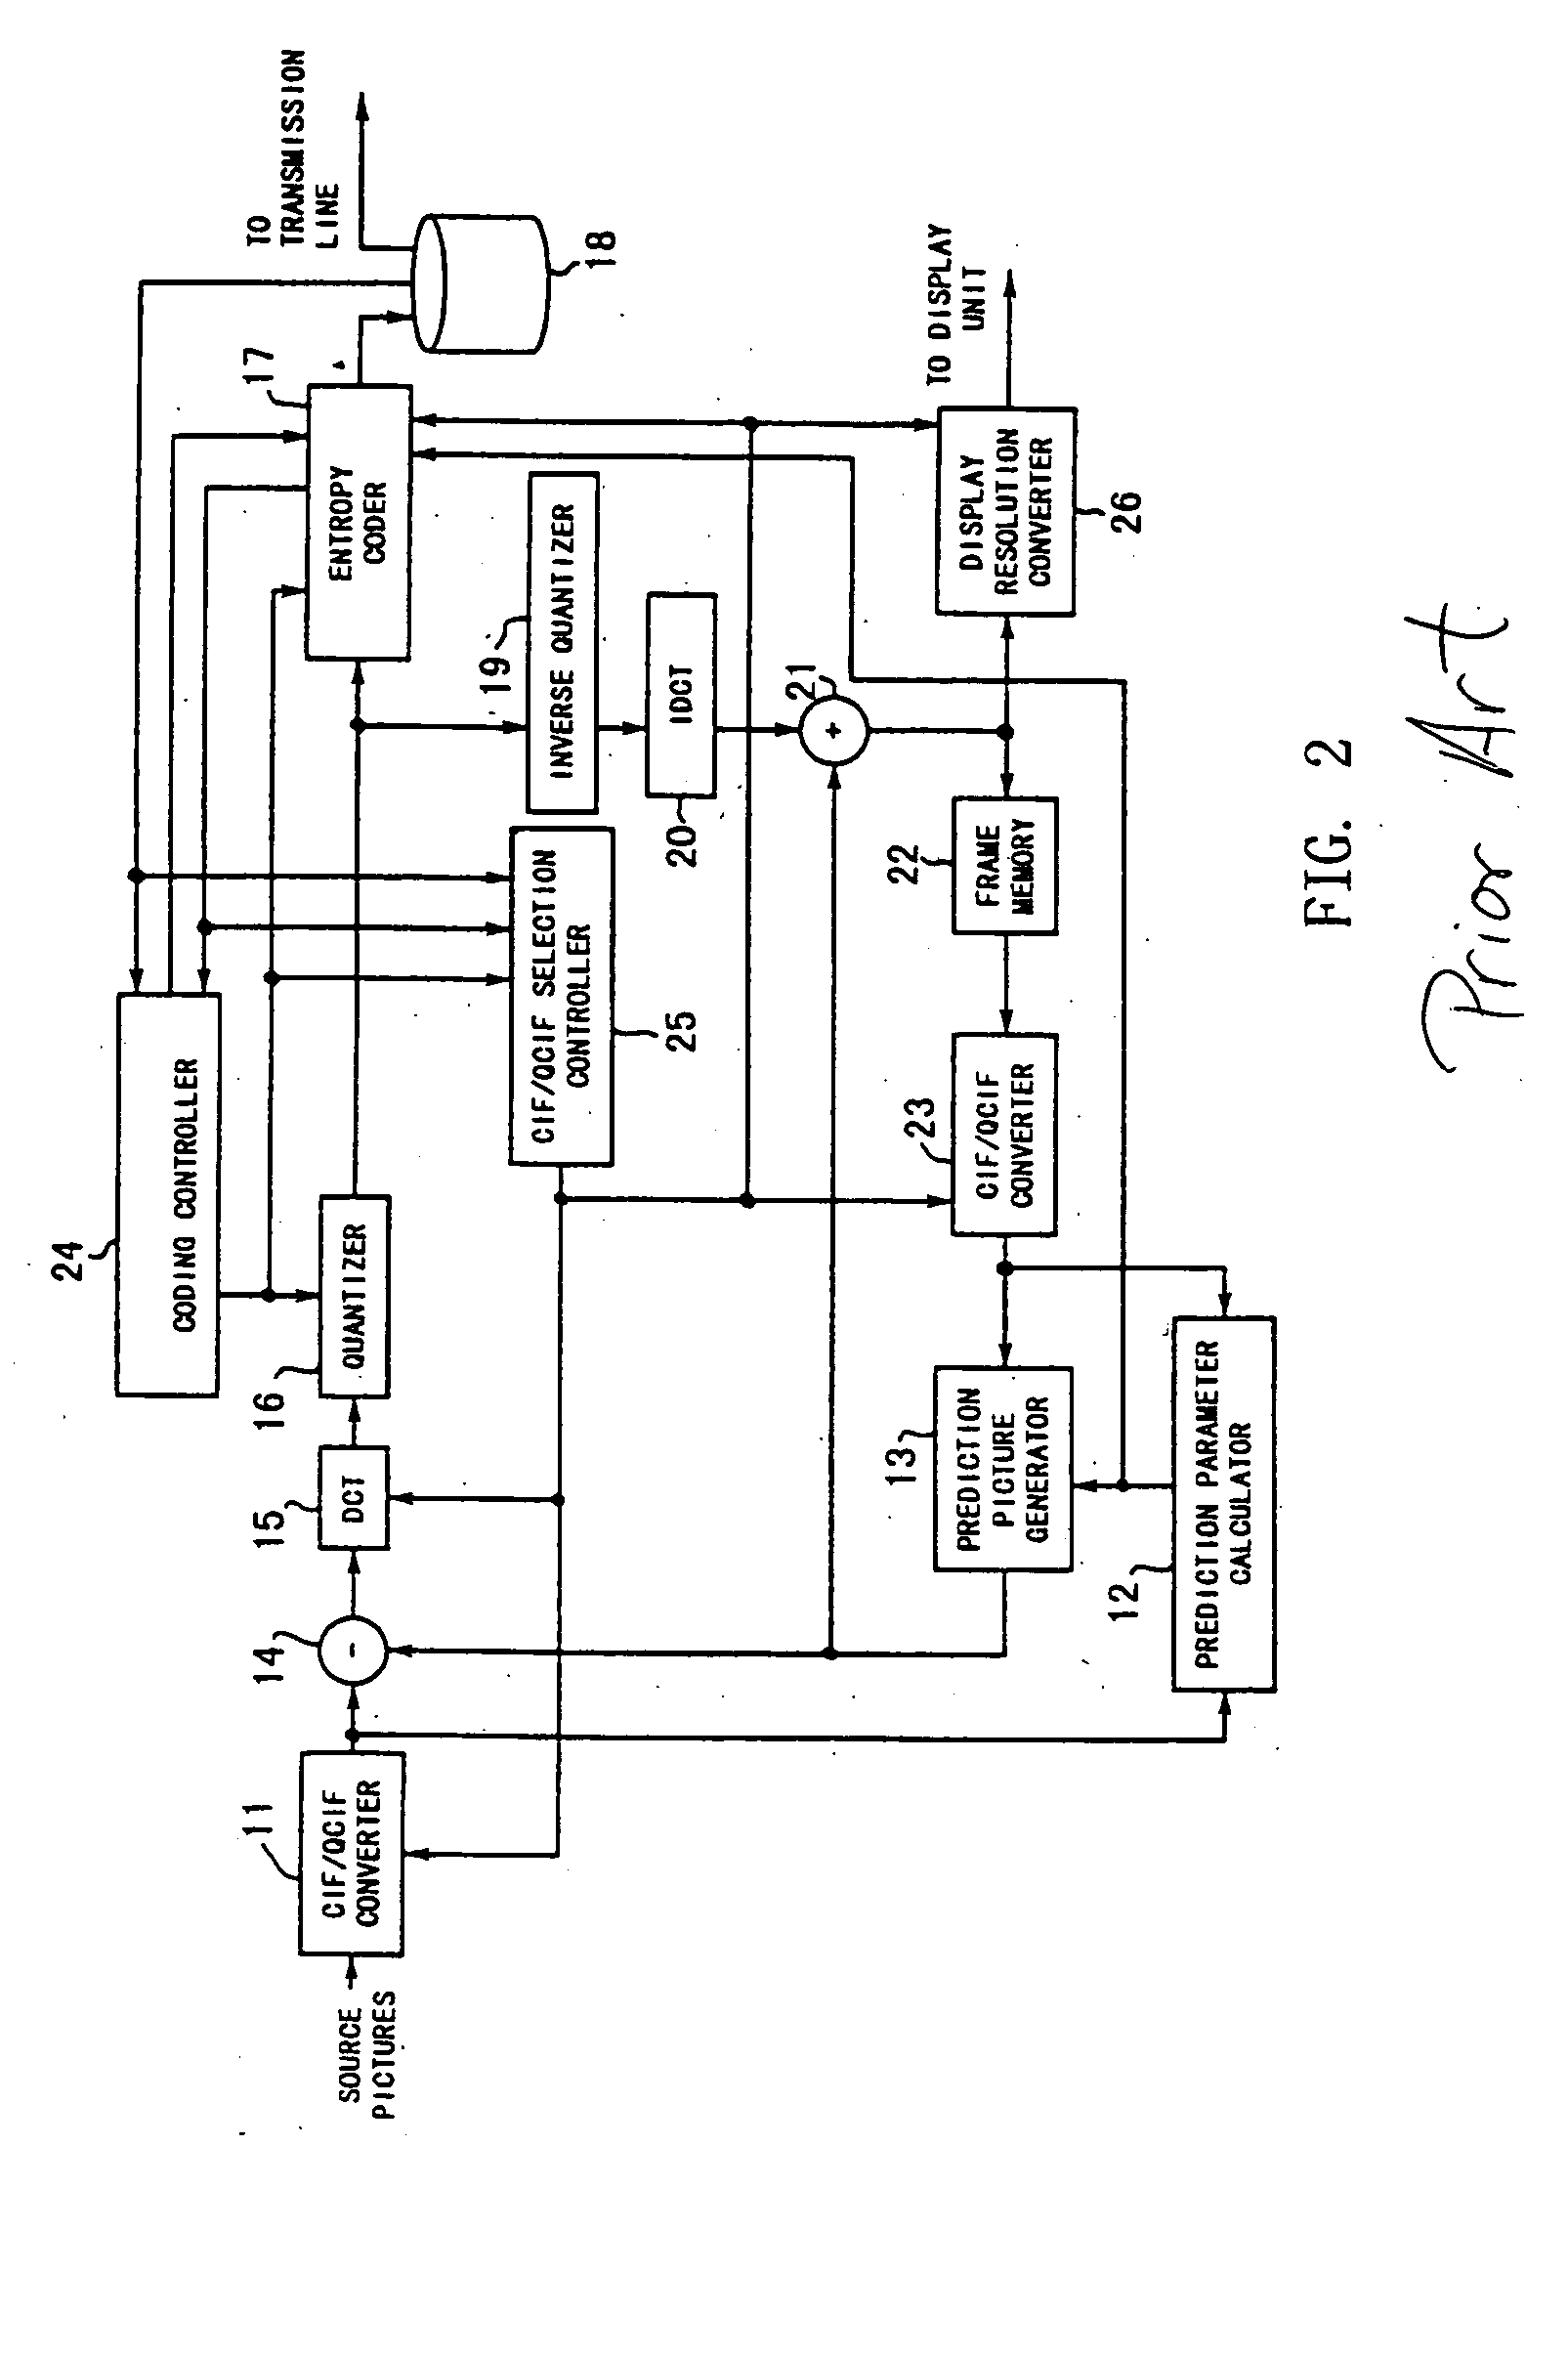 System and method for the dynamic resolution change for video encoding